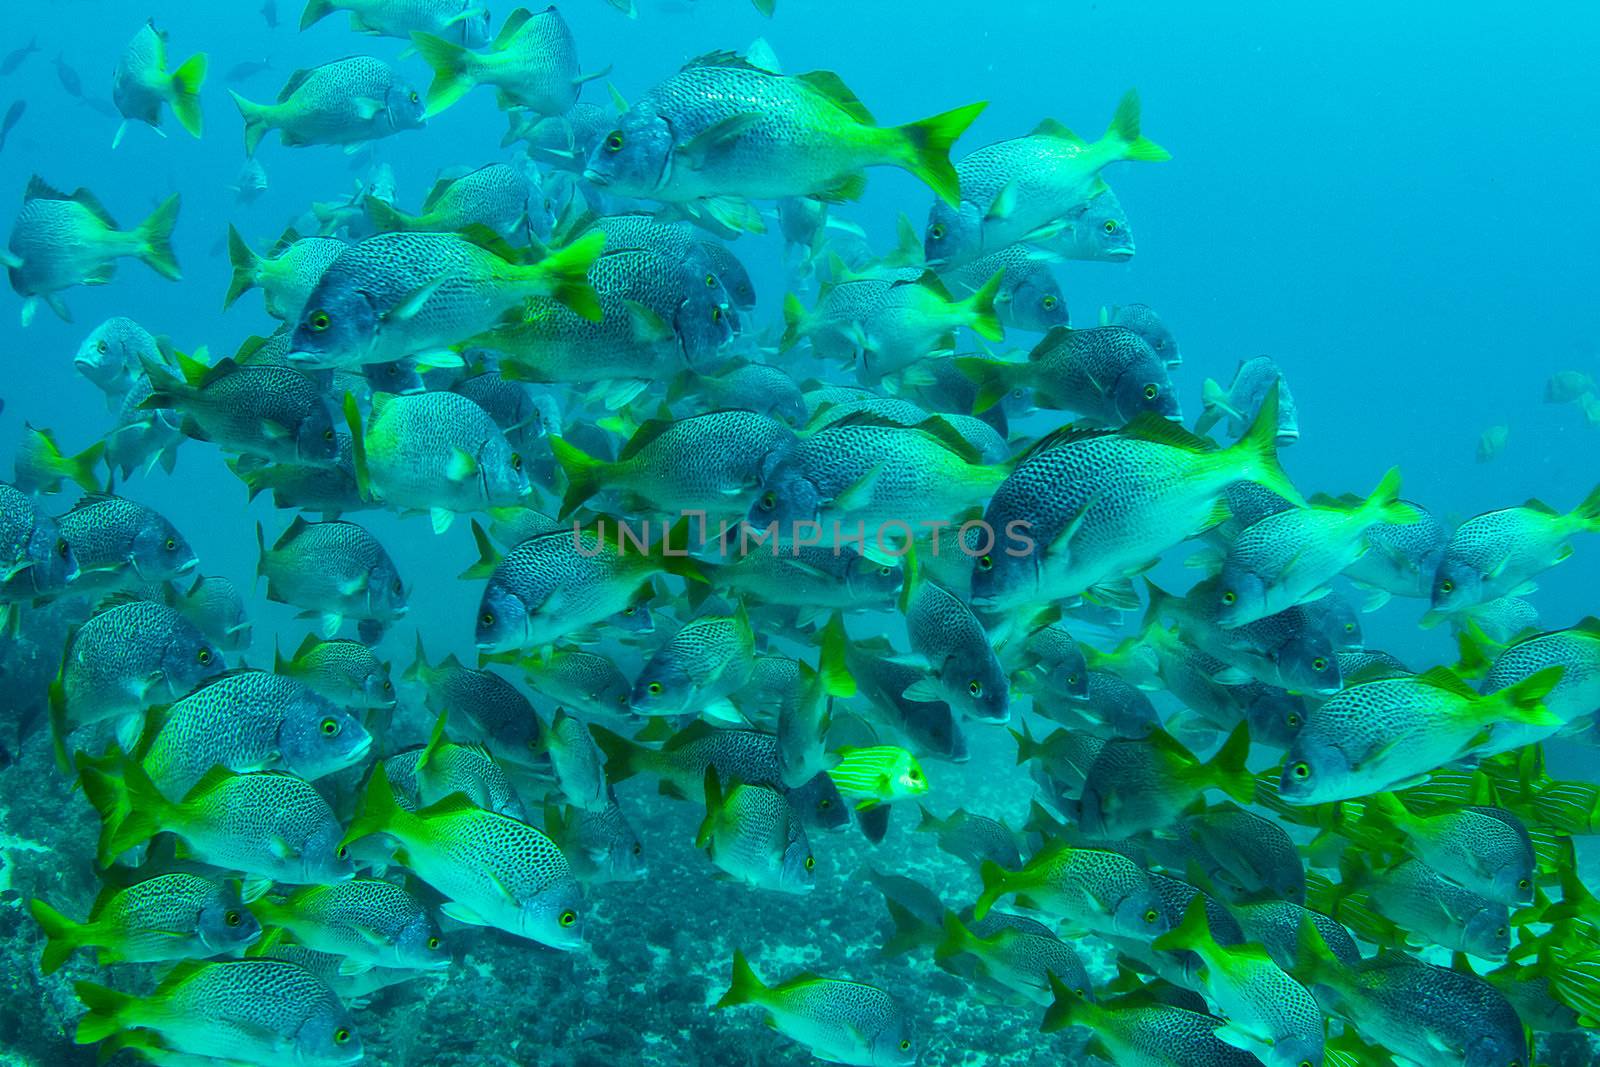 A school of snappers in Costa Rica.